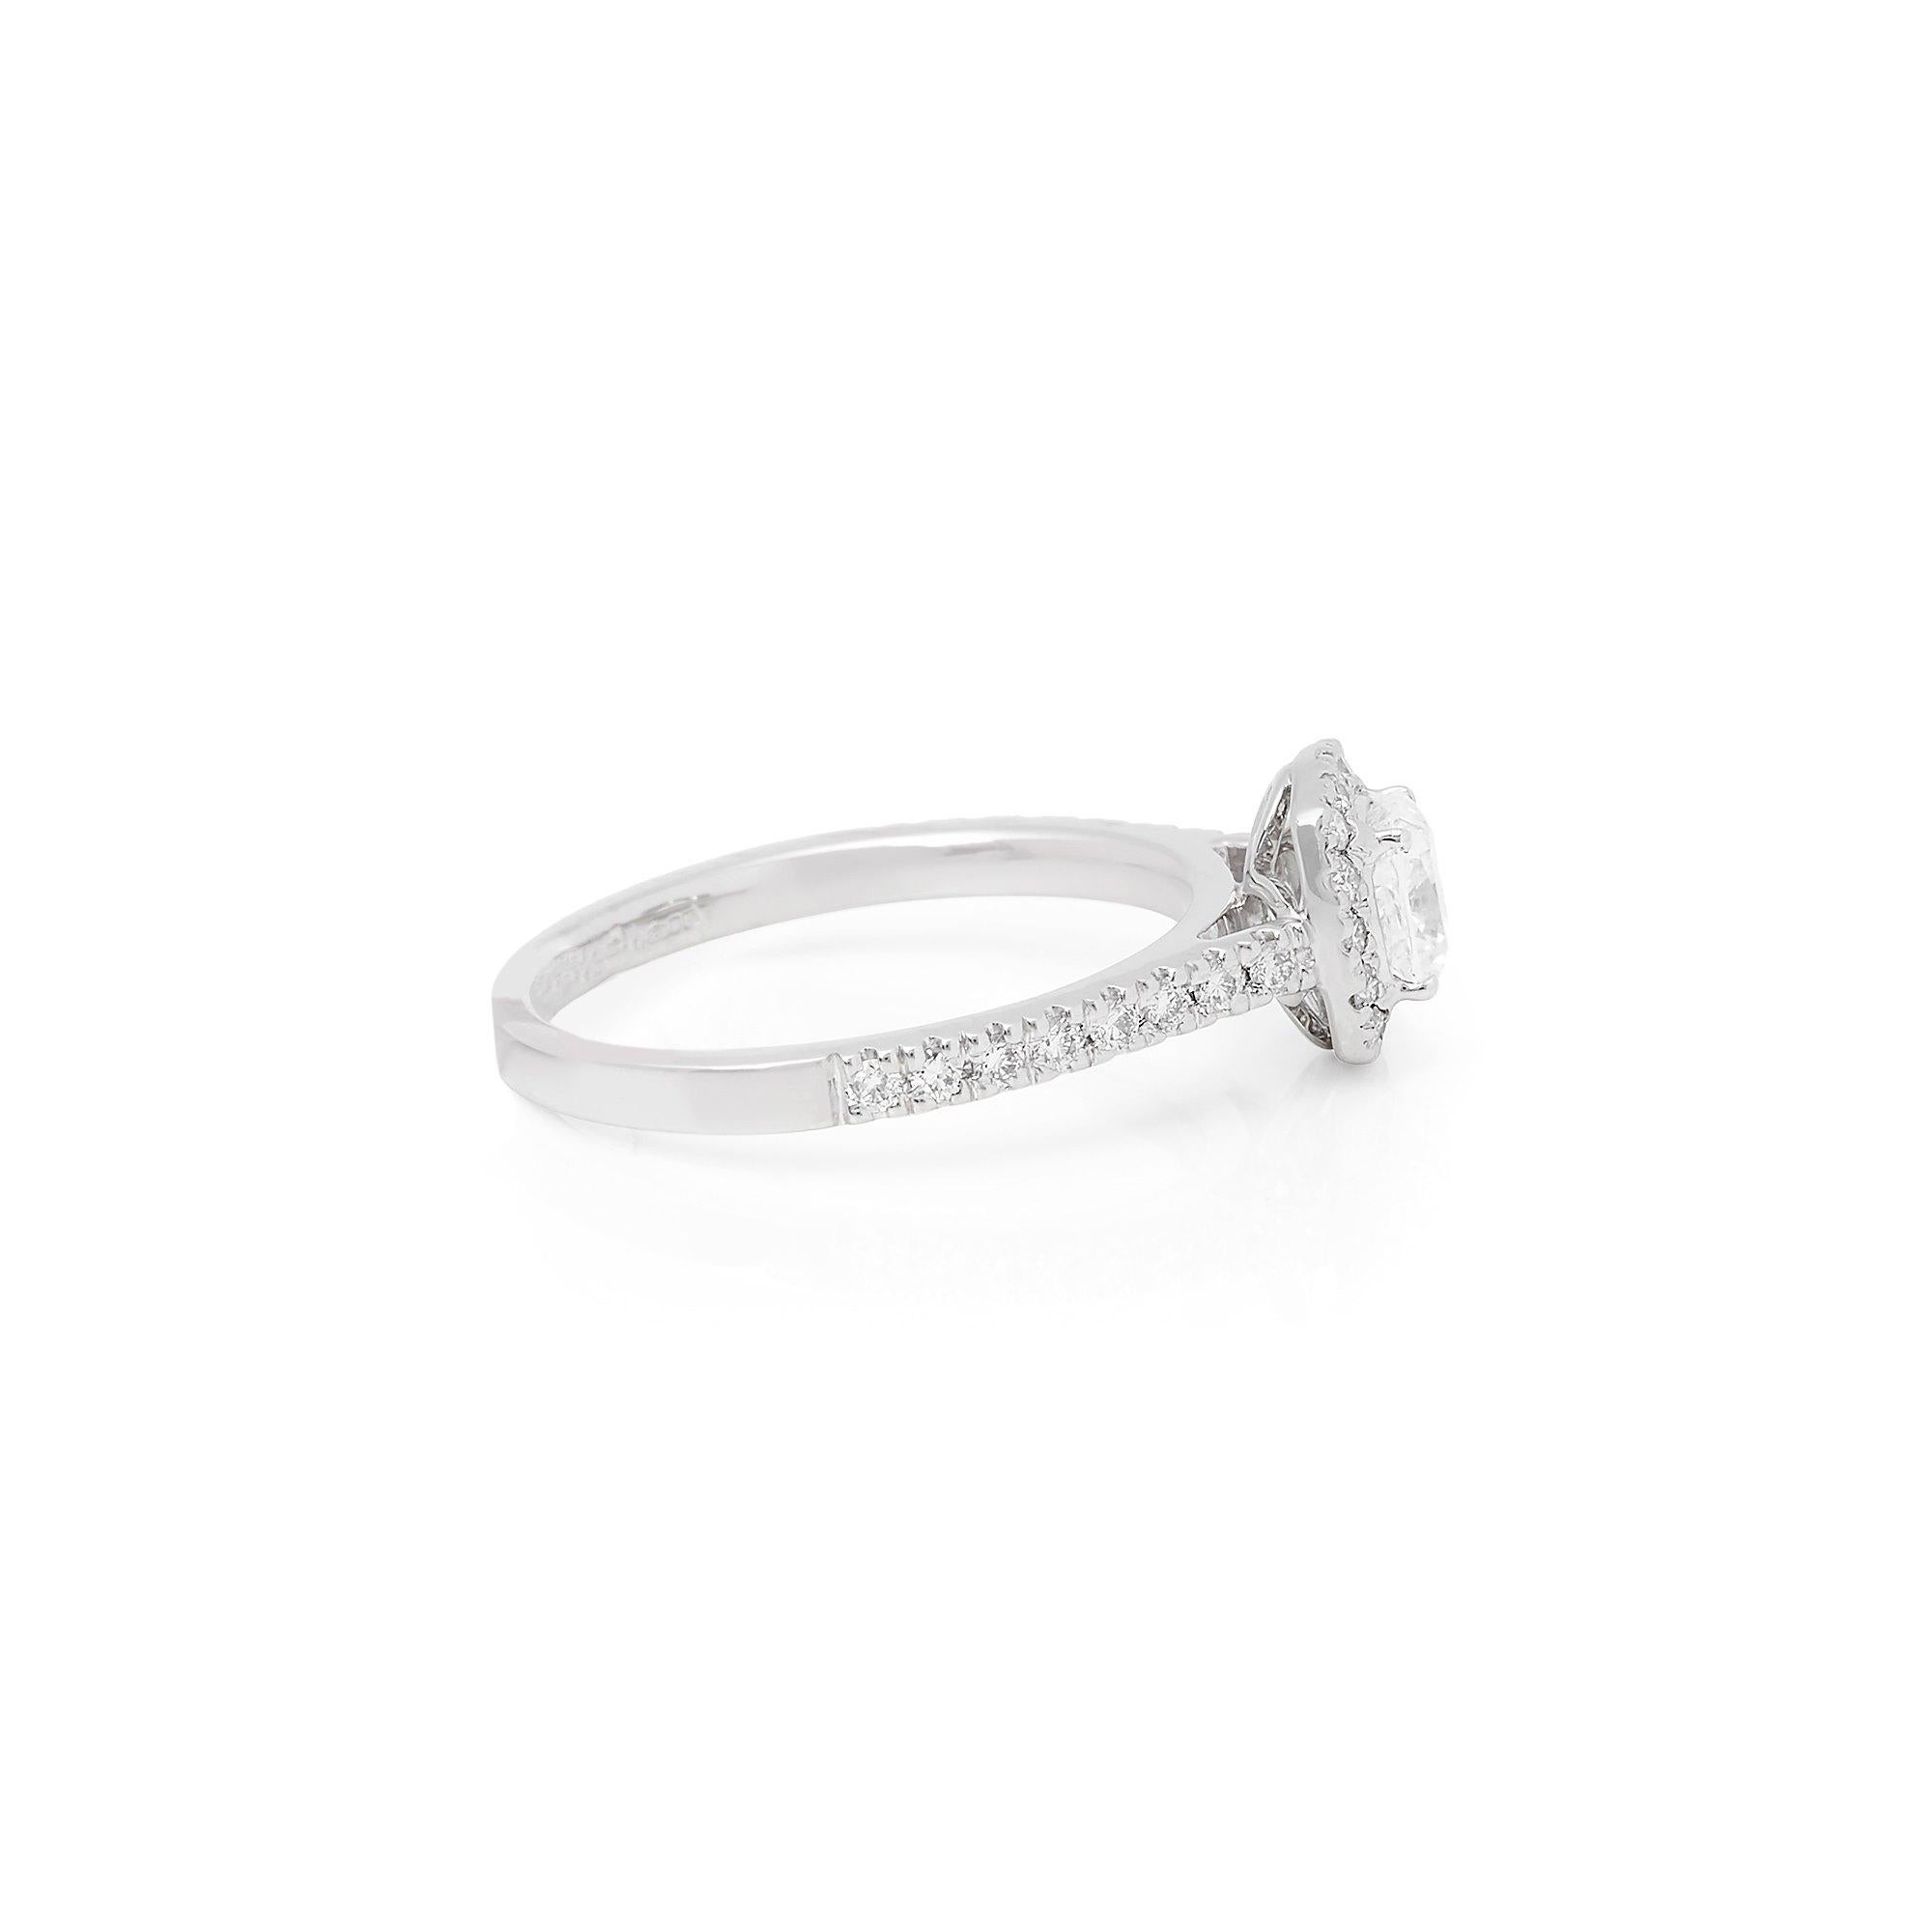 This Ring features a Cushion Cut Diamond to the centre totalling 0.61cts F Colour VS1 Clarity, with Micro Set Round Briliant Cut Diamond Halo and Shoulders totalling 0.32cts. Set in Platinum. Ring size UK L1/2, EU Size 52, USA Size 6. Complete with